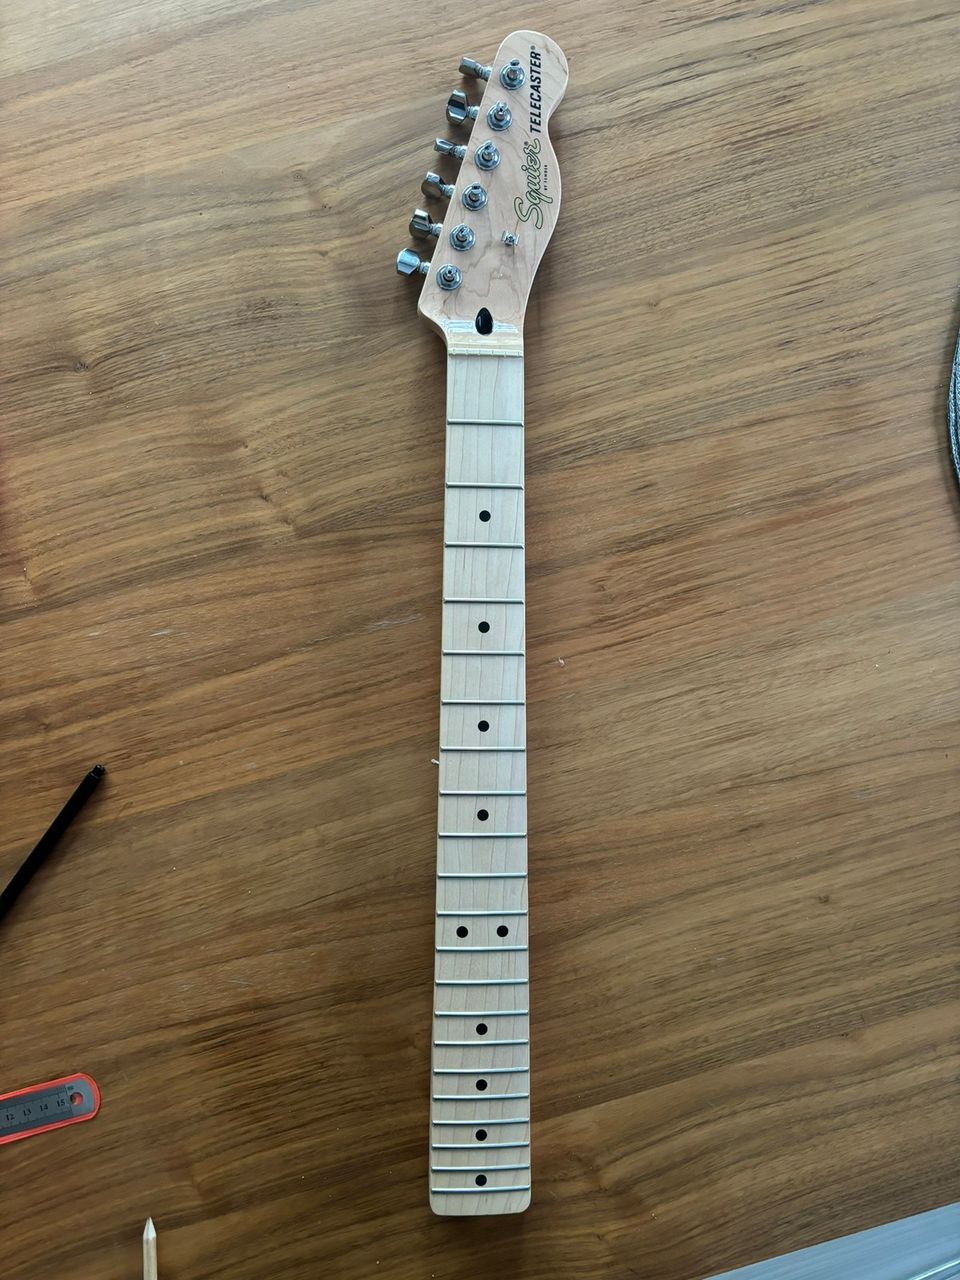 Squier by Fender deluxe telecaster kaula